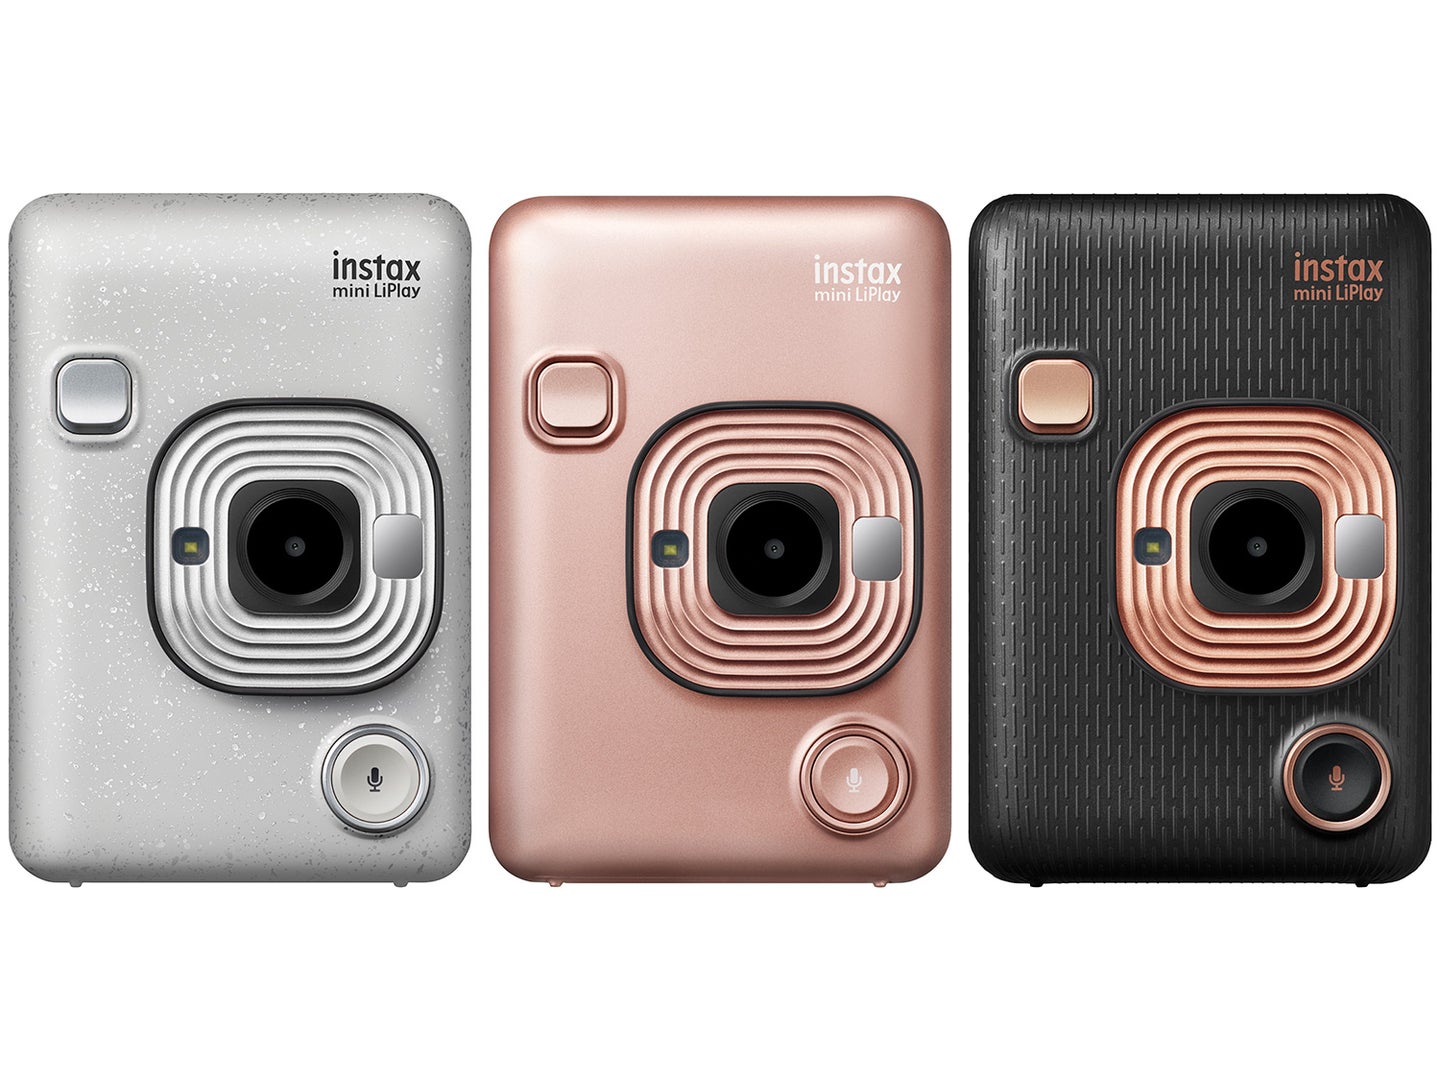 The Fujifilm Instax Mini LiPlay is an instant film camera that records sound